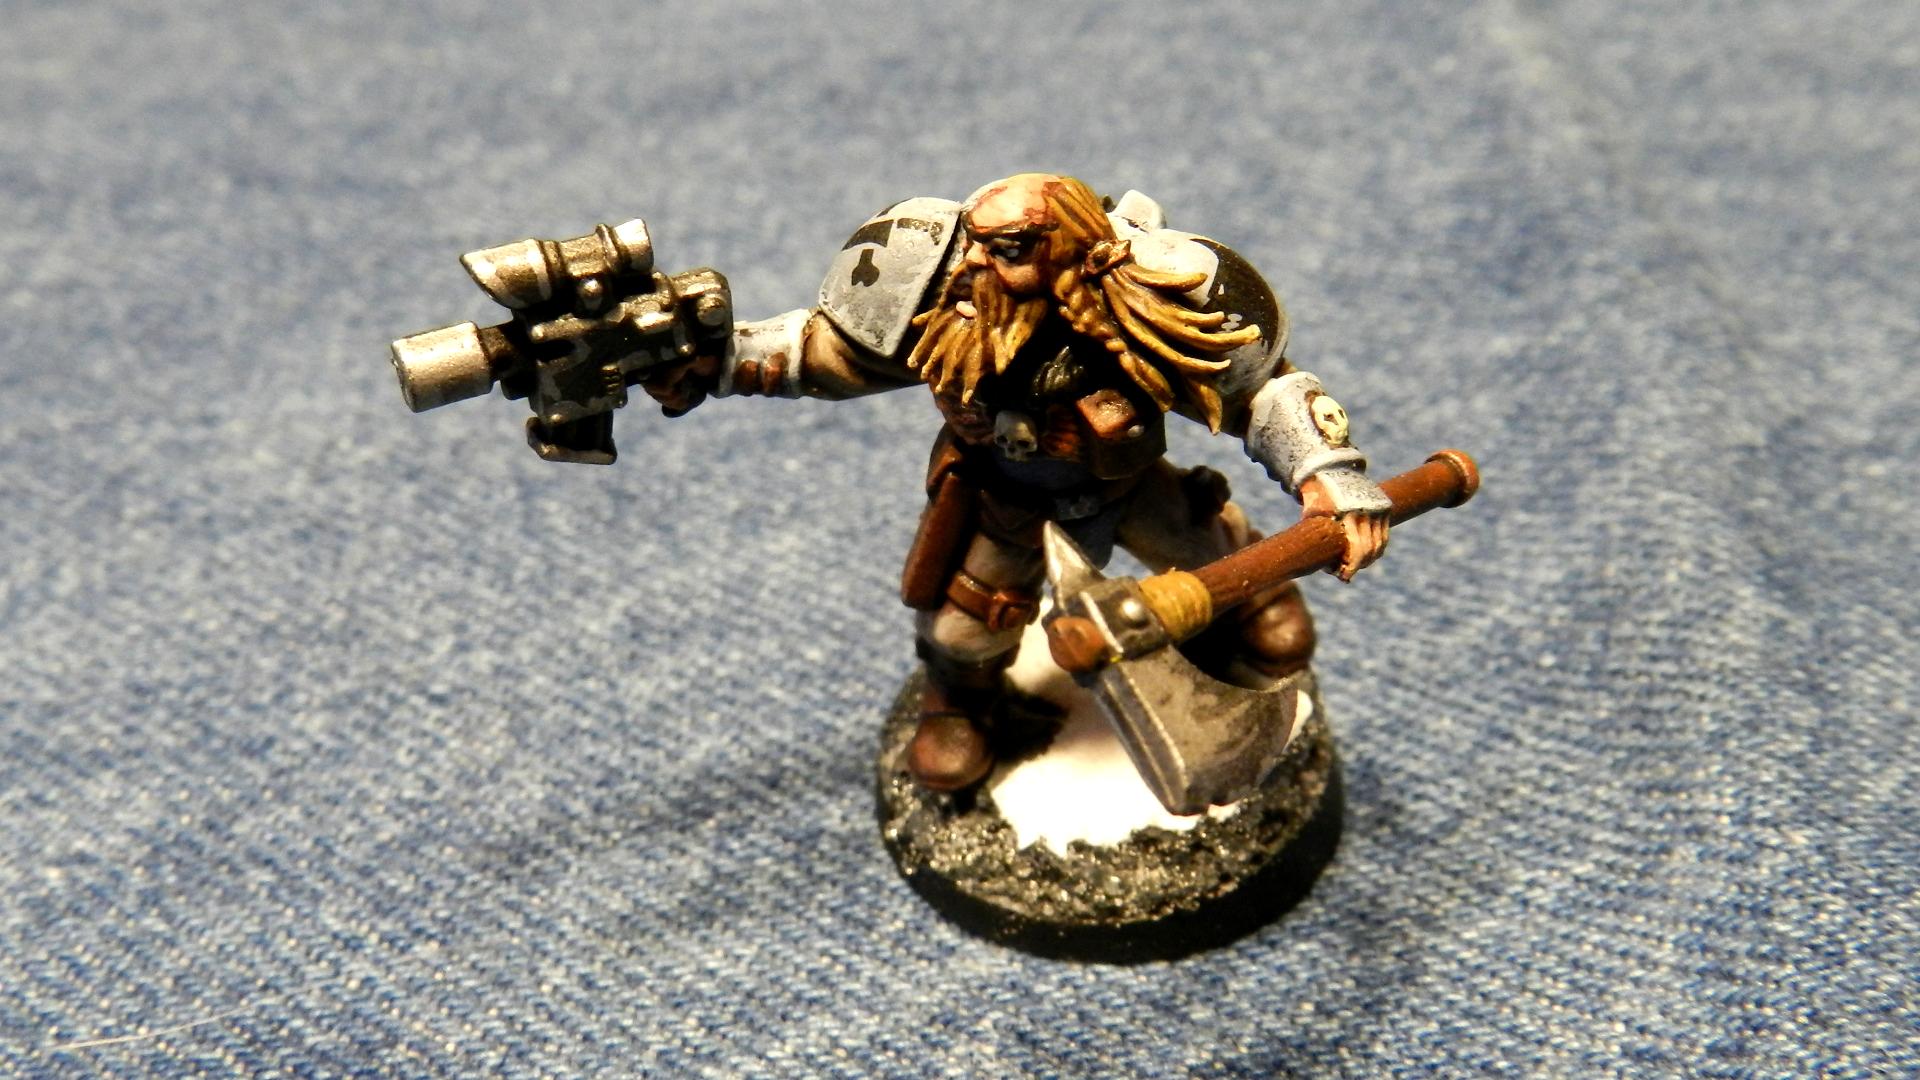 Meltagun, Snow, Space Wolves, Warhammer 40,000, Wolf Scout, Wolf Scouts